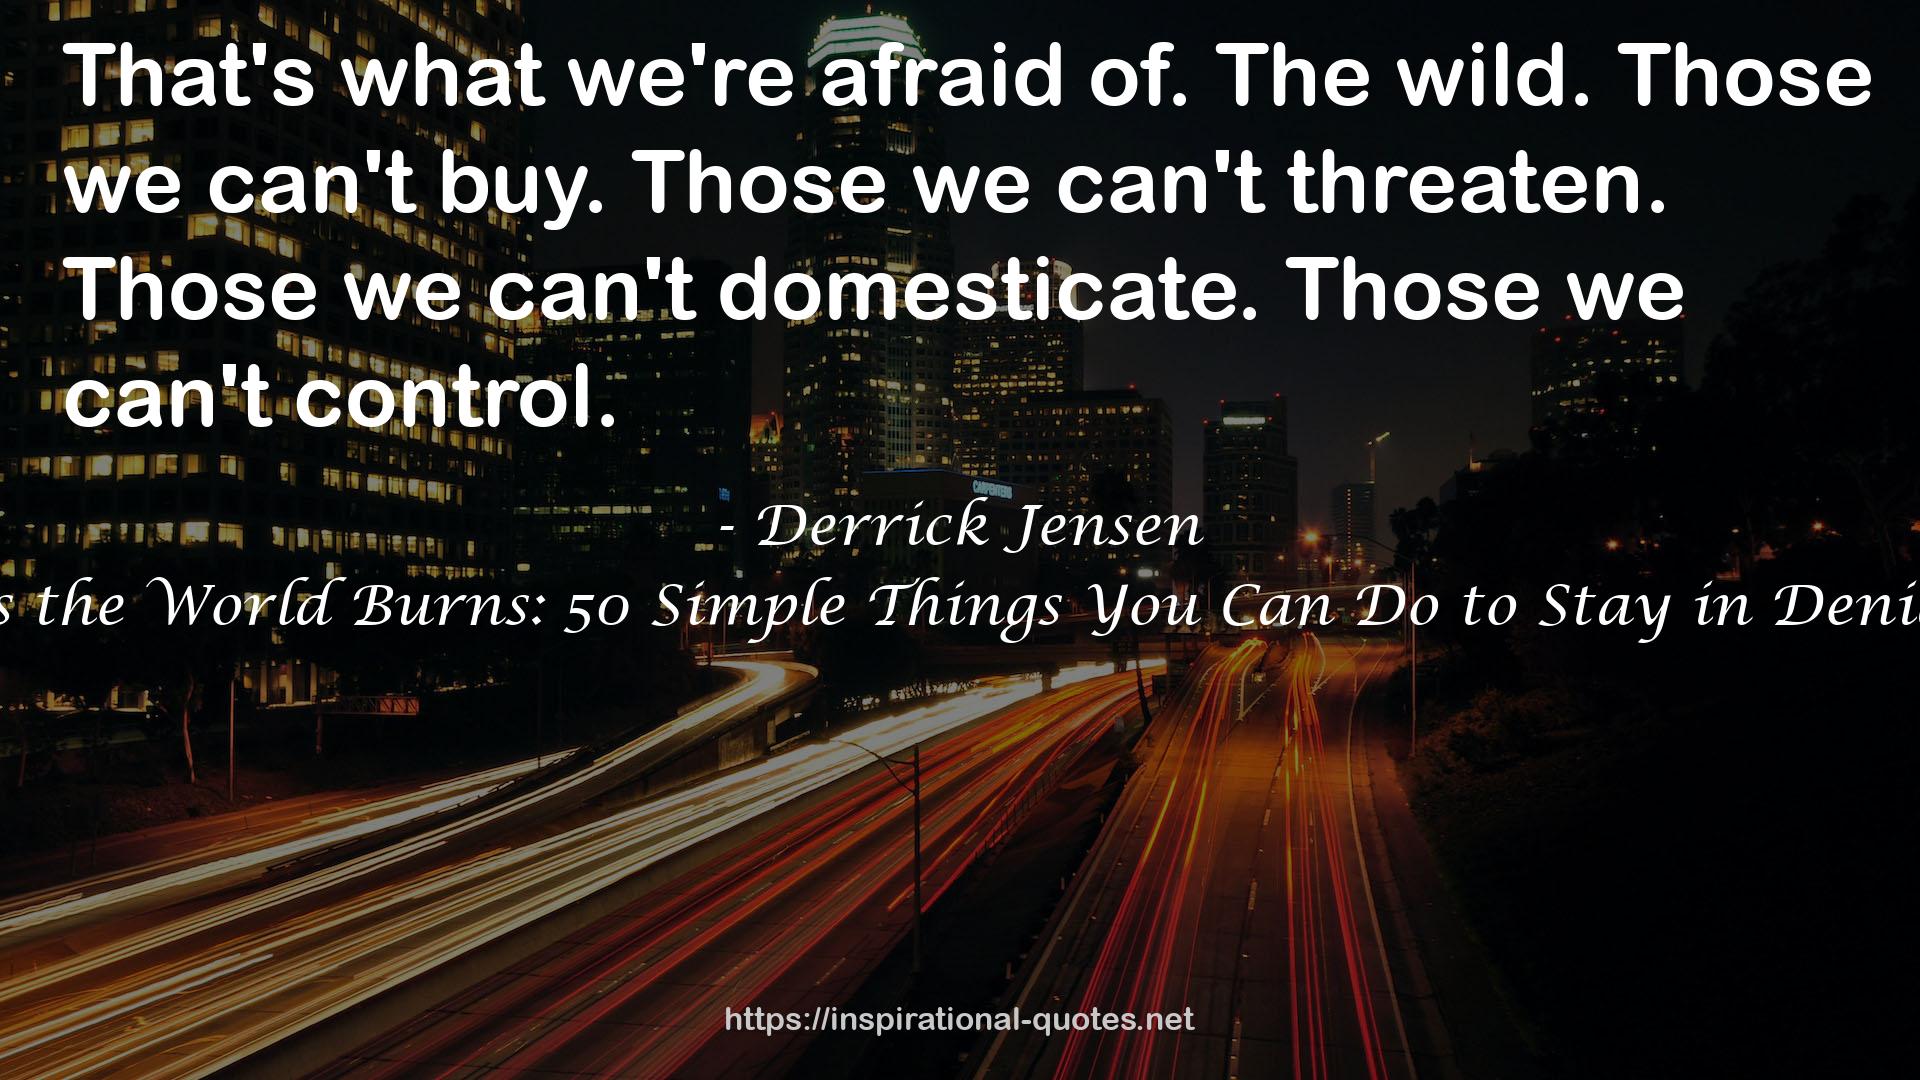 As the World Burns: 50 Simple Things You Can Do to Stay in Denial QUOTES